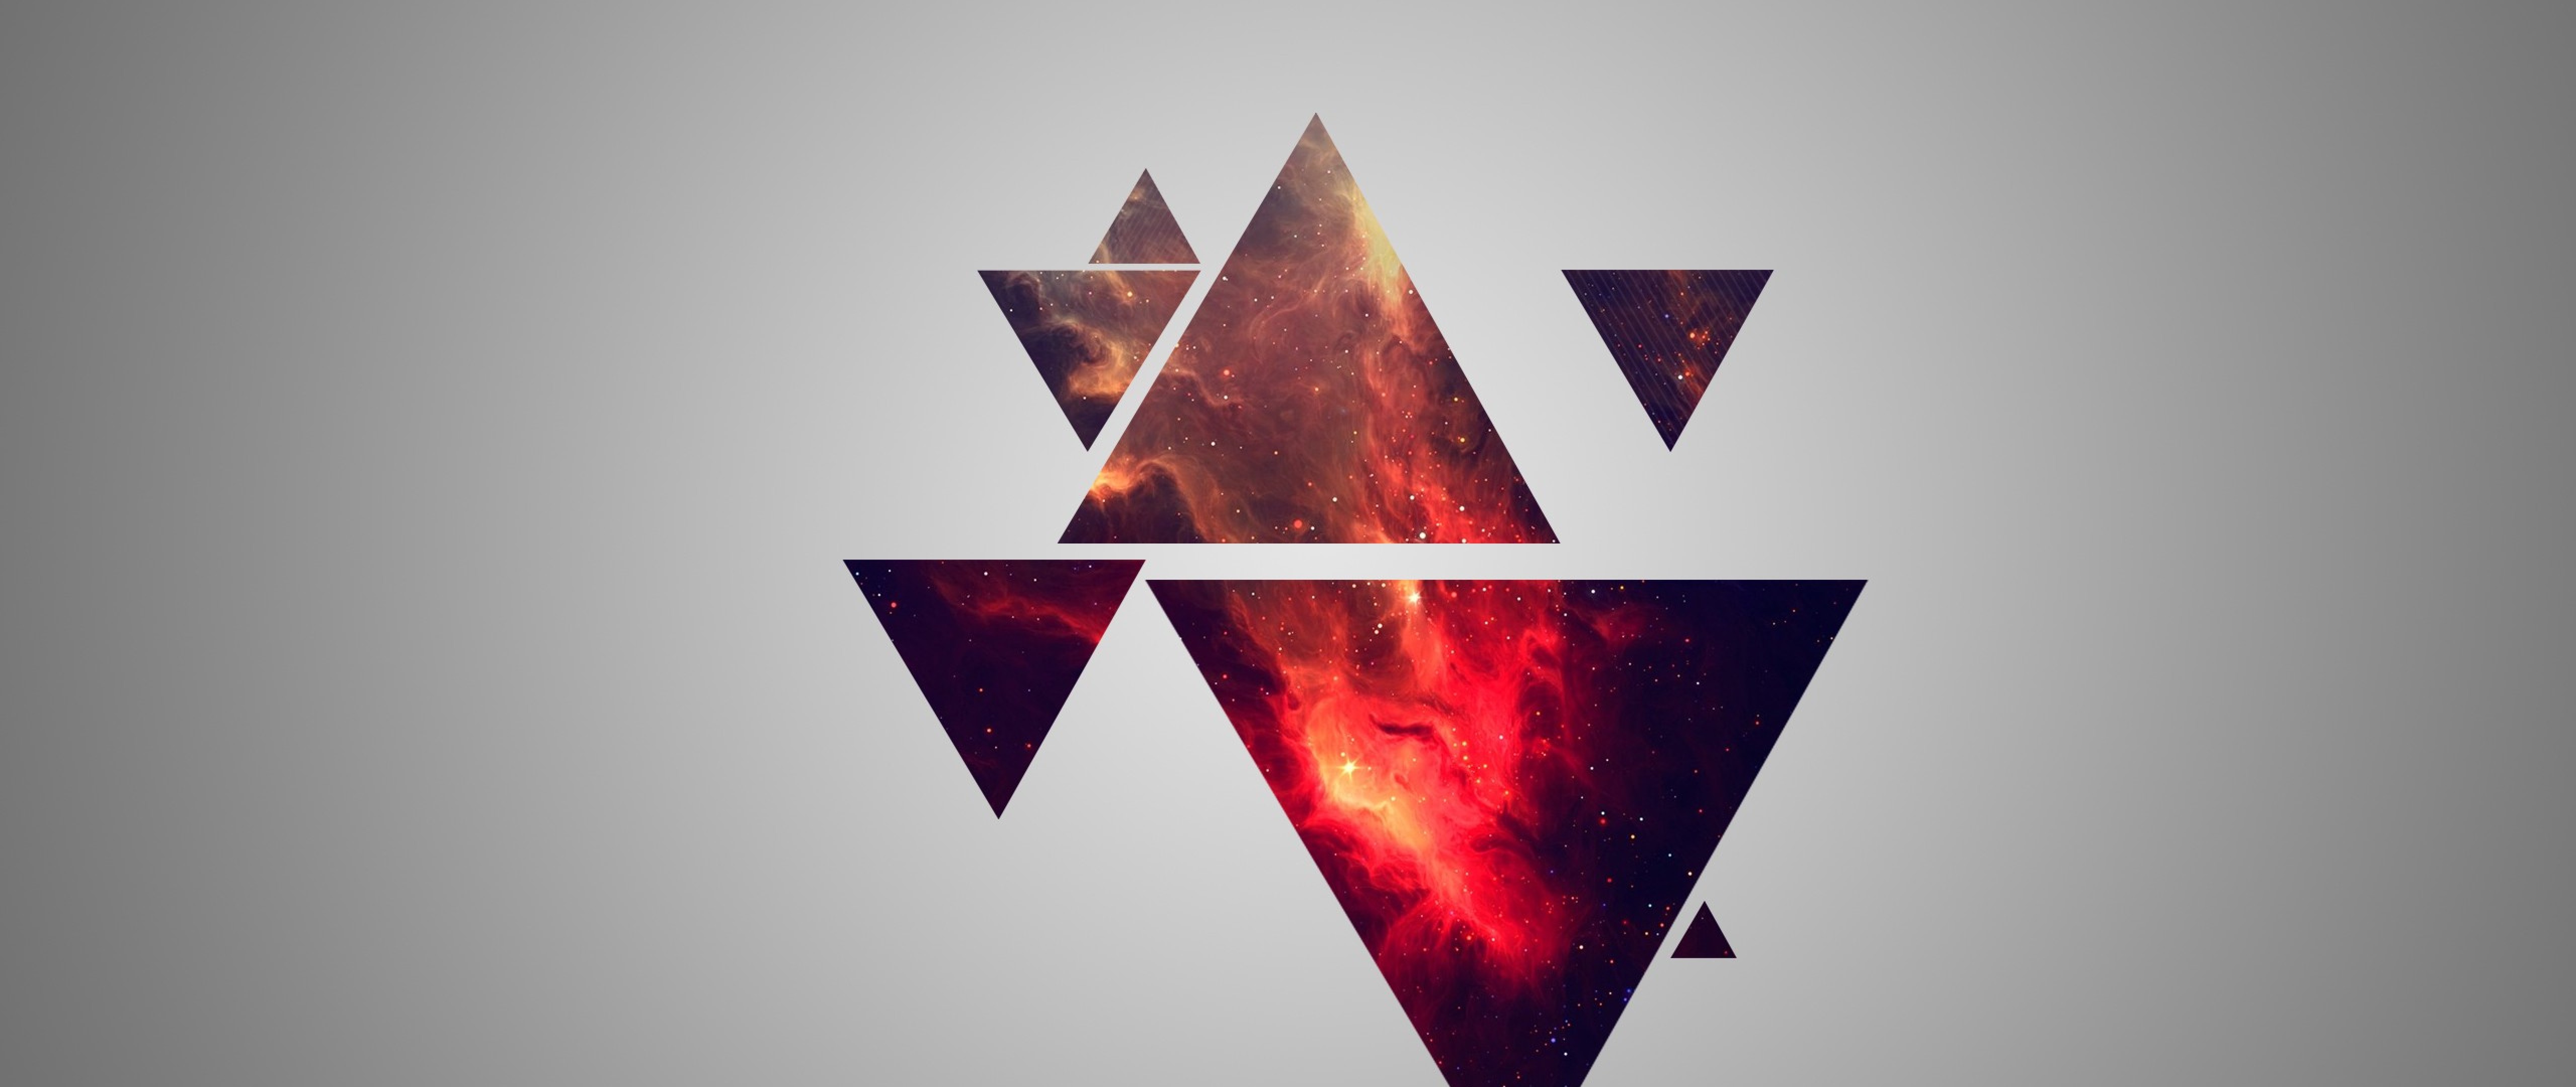 3D Triangle Abstract Design Wallpaper for Desktop and ...